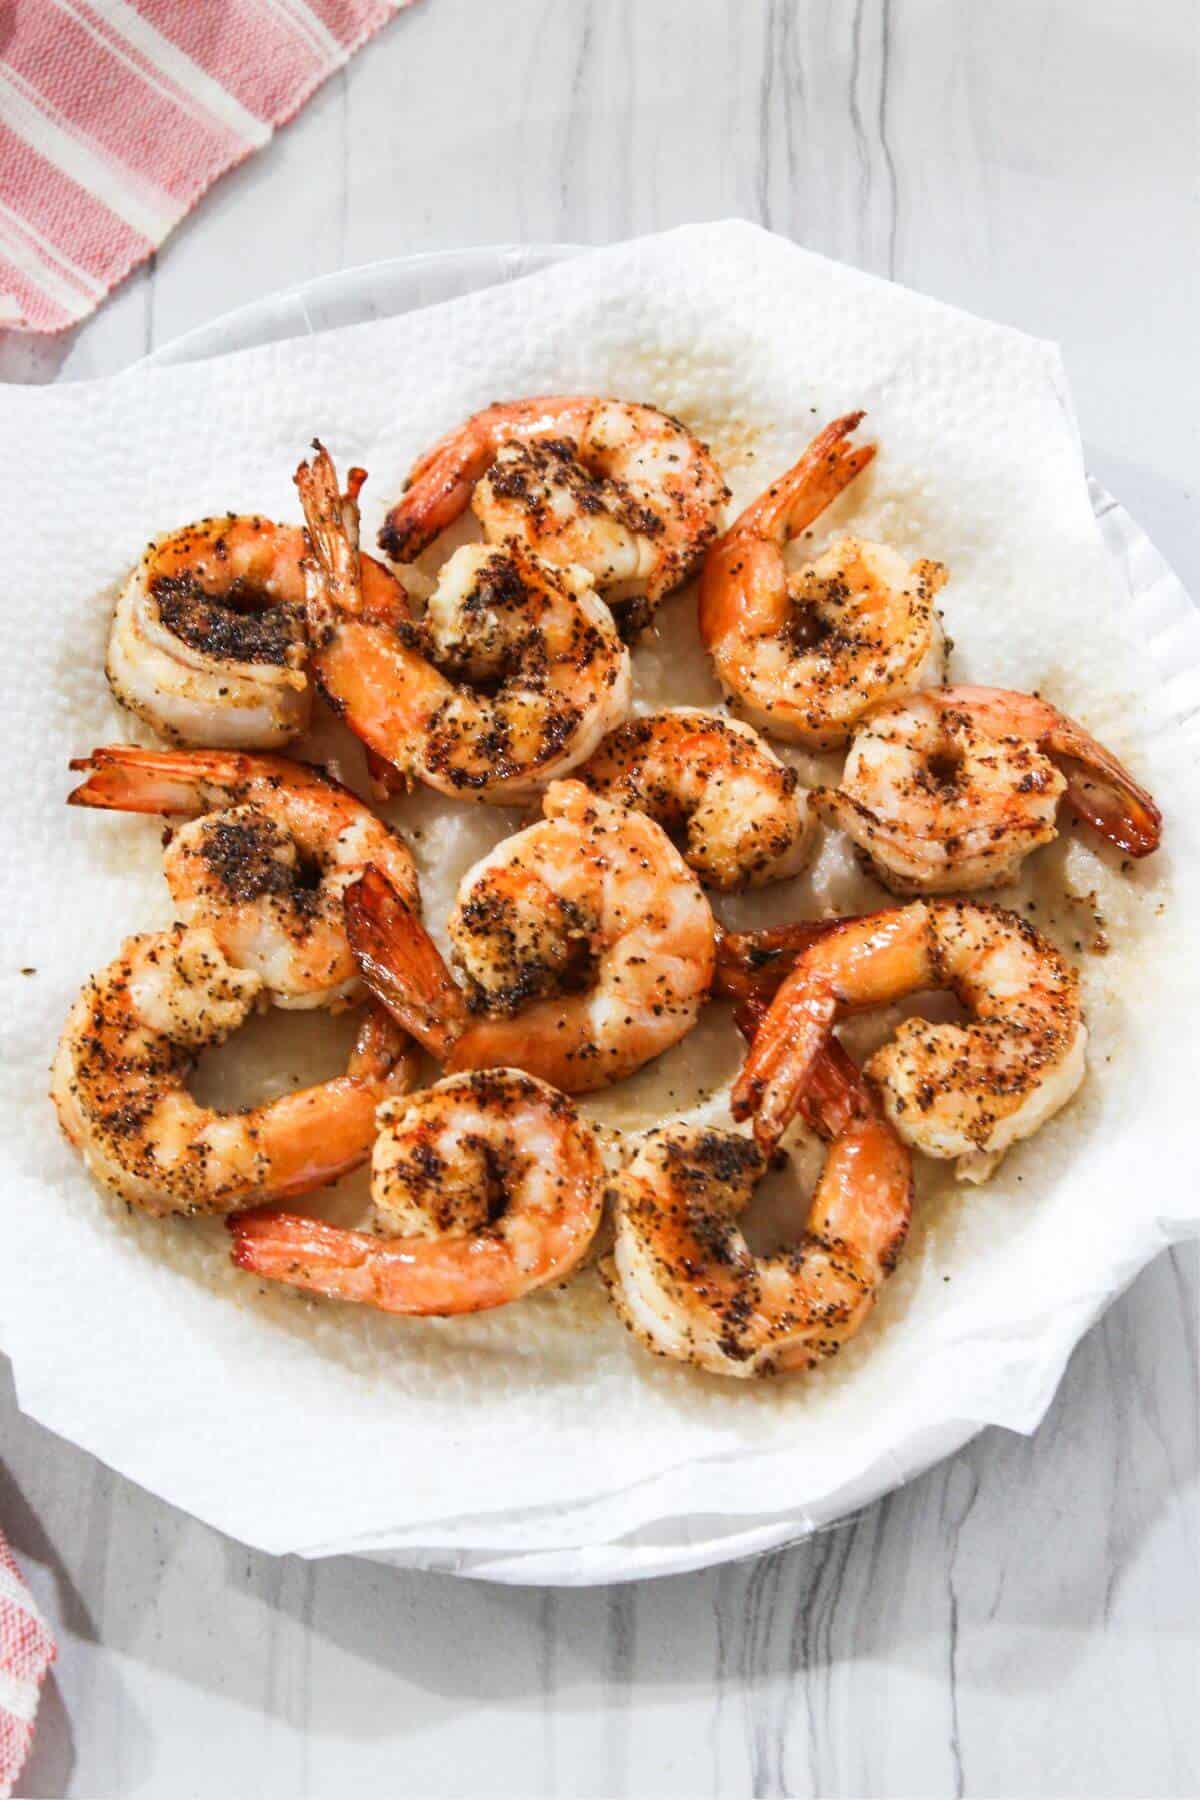 Grilled shrimp on a white plate with a red napkin.